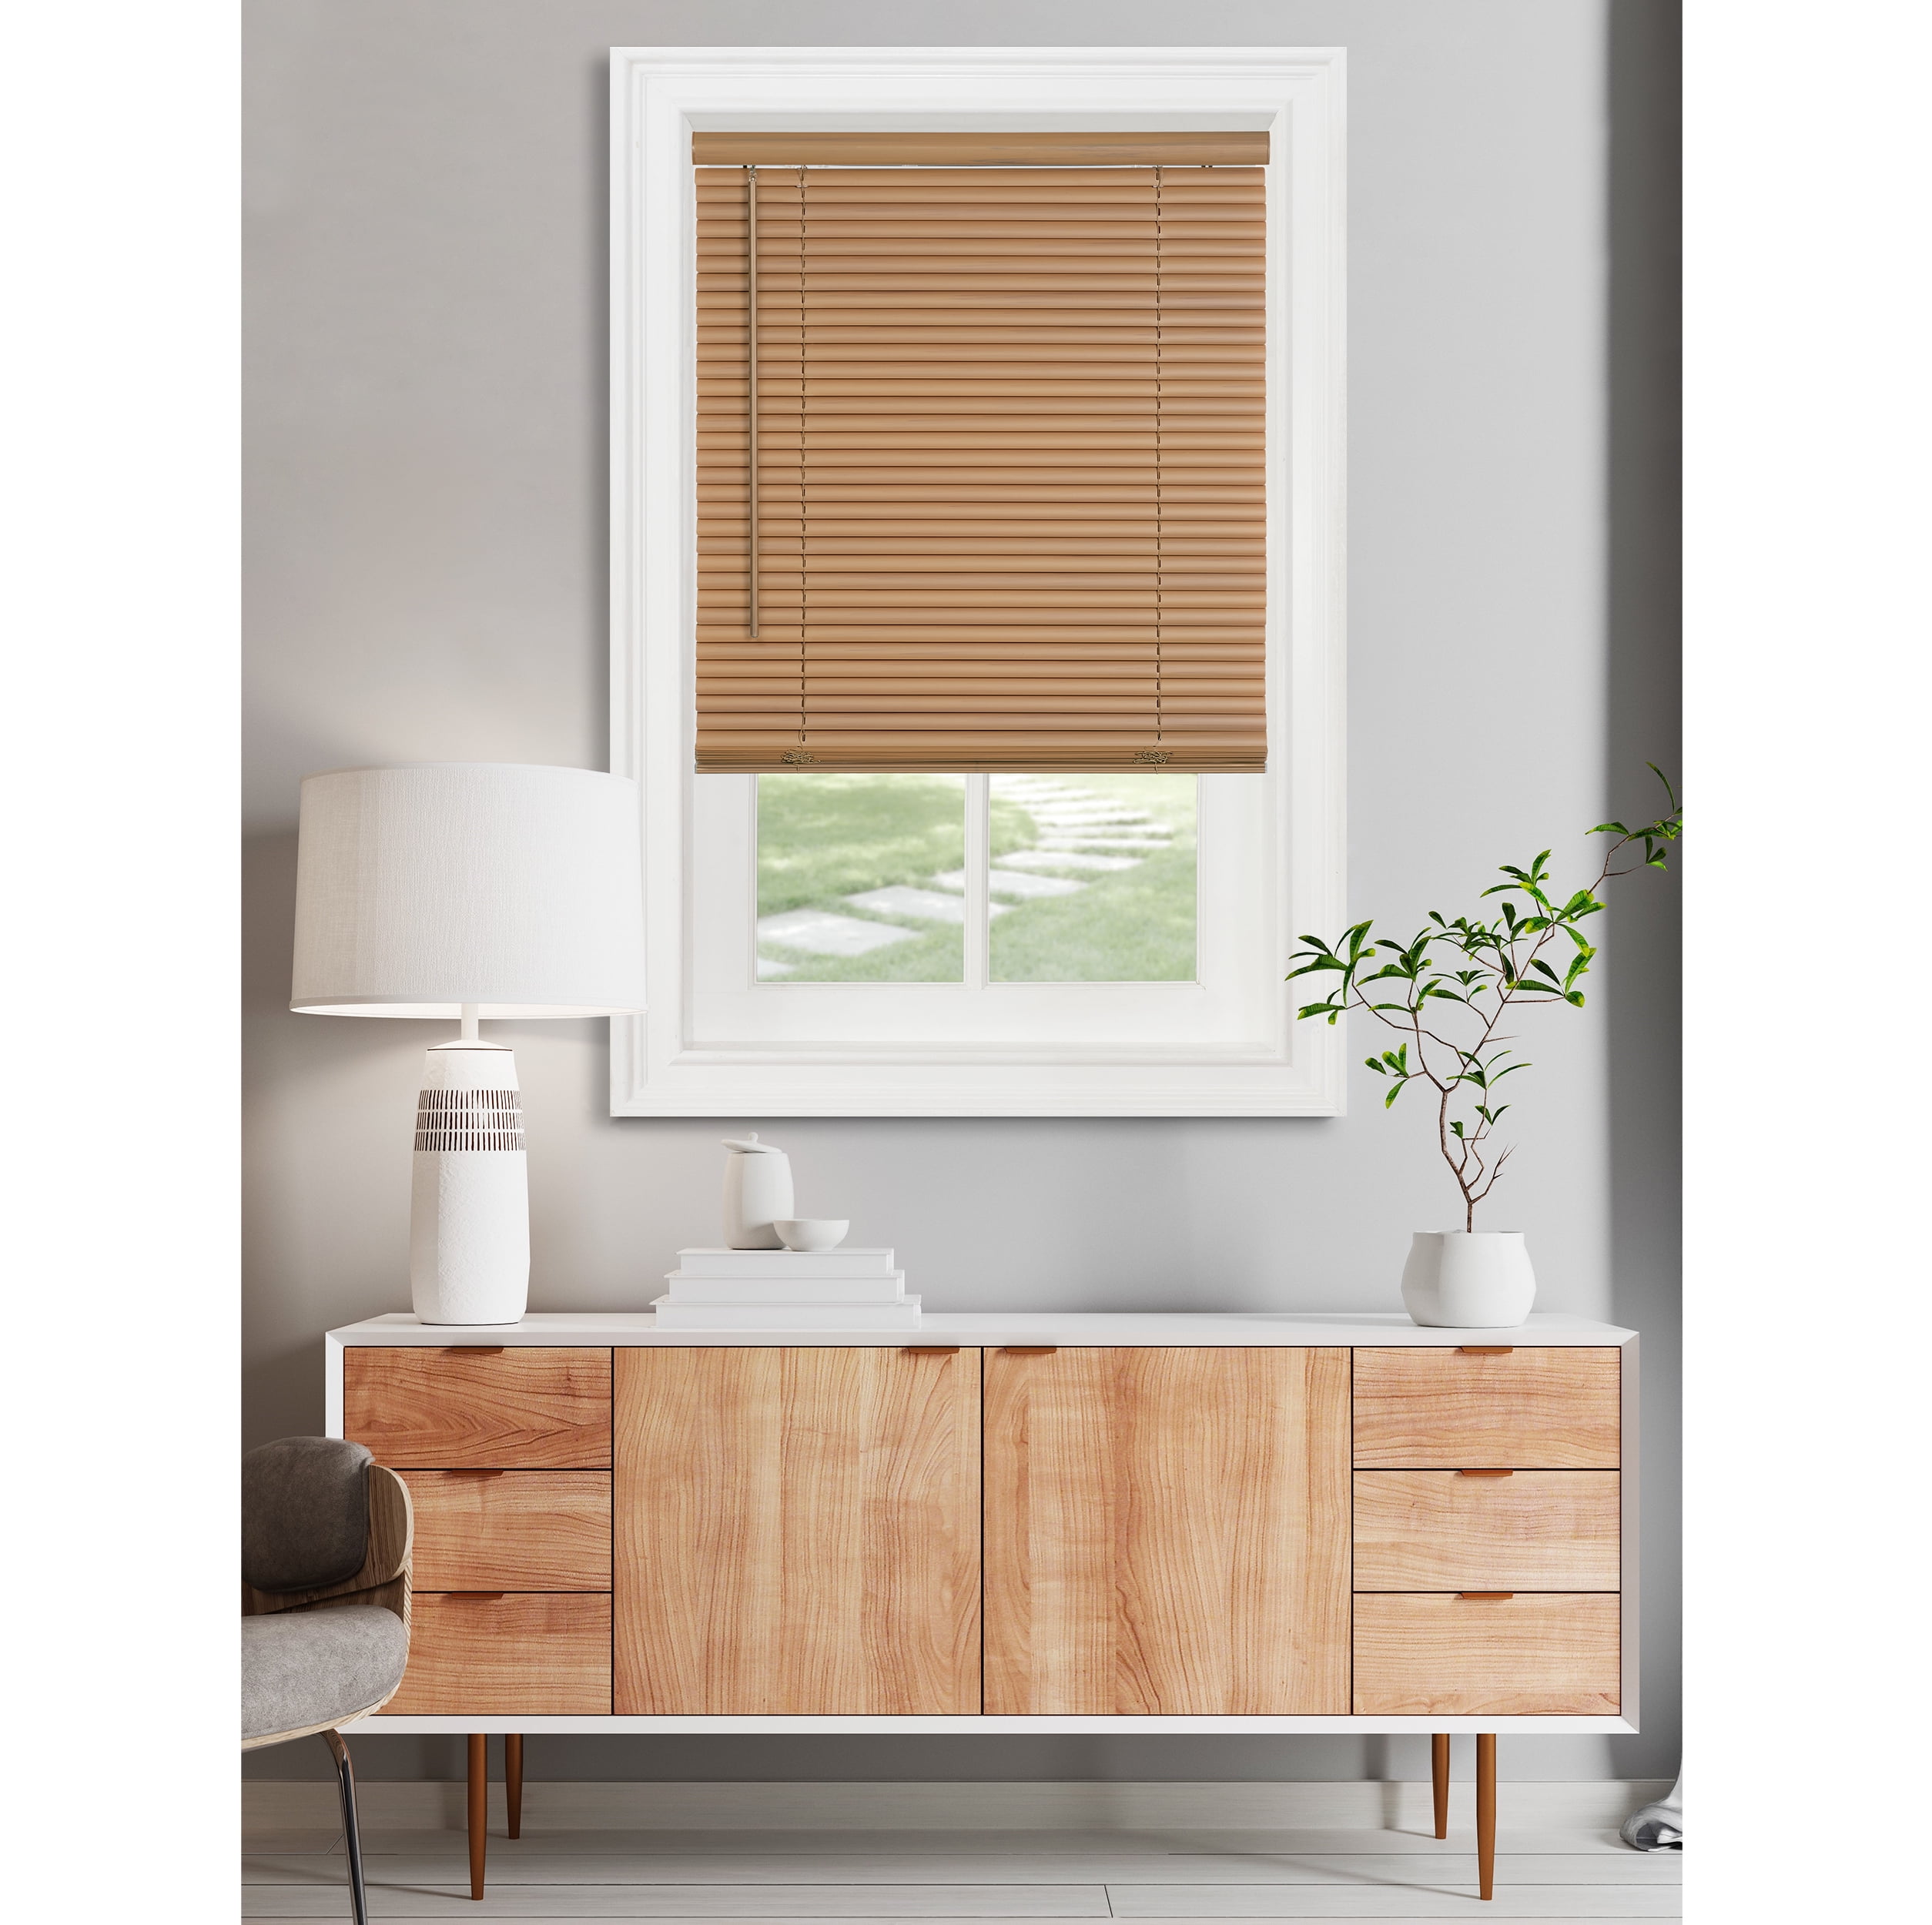 Picture of Achim MSG2307WD6 Cordless GII Morningstar 1 in. Light Filtering Mini Blind, 30 x 72 in. - Woodtone